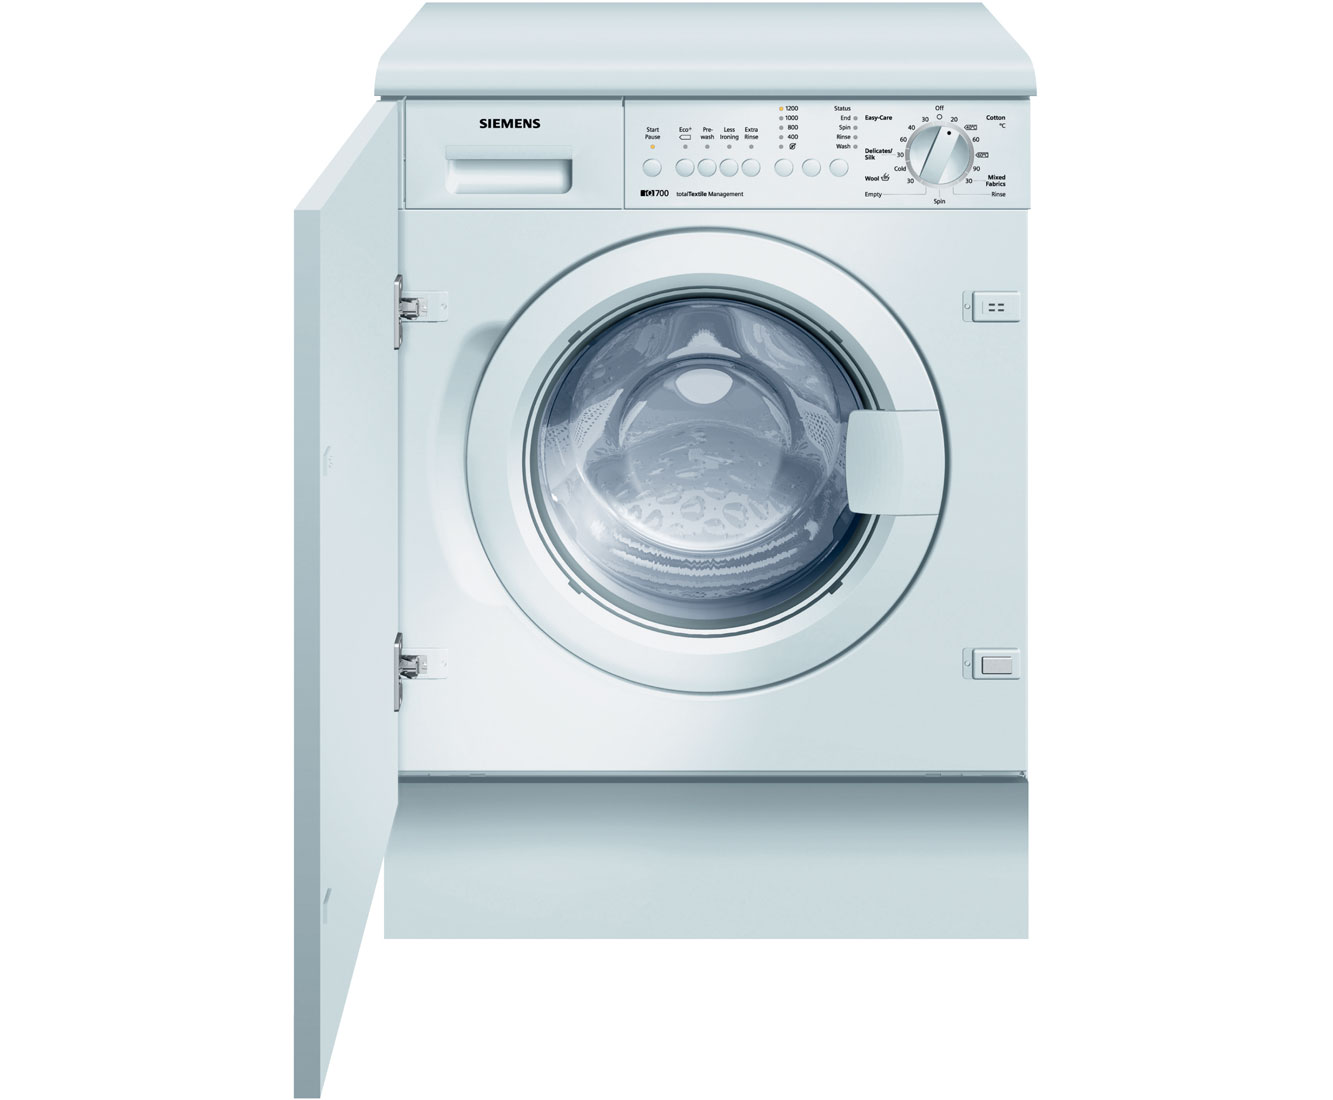 Siemens IQ-700 WI12S141GB Integrated 7Kg Washing Machine with 1200 rpm Review